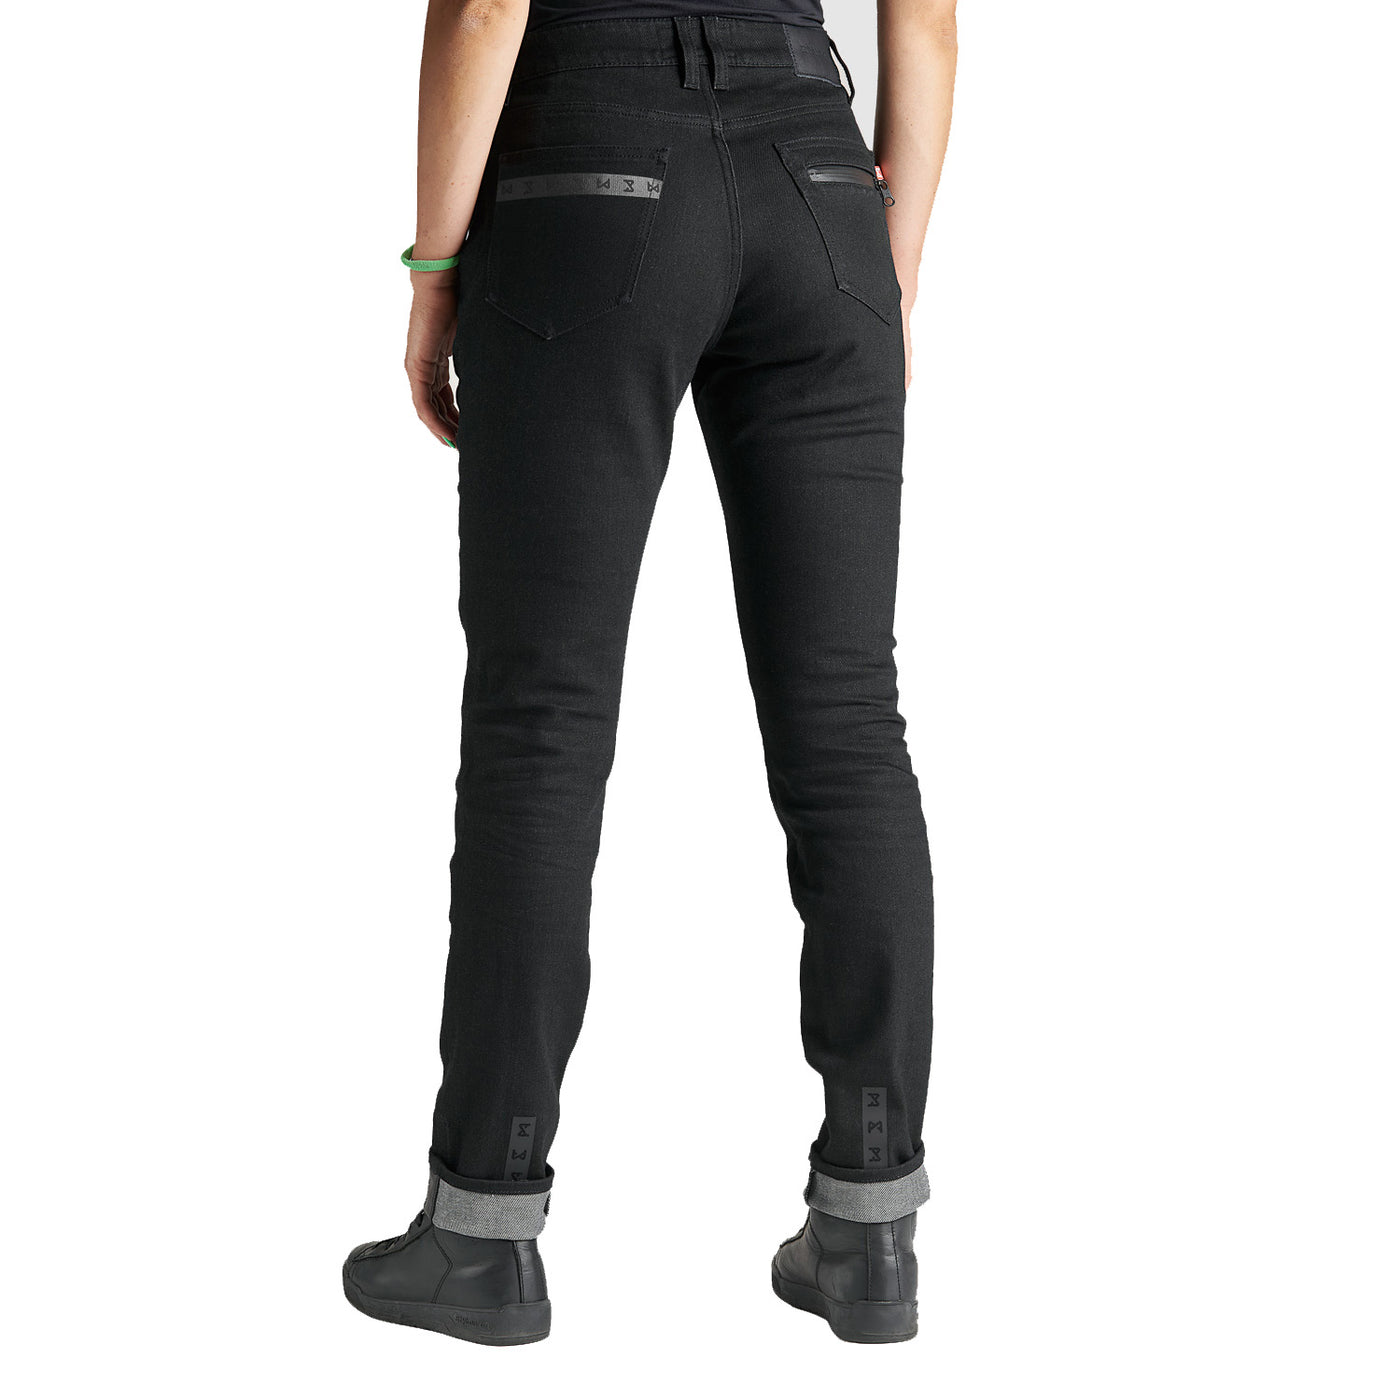 Motorcycle Jeans for Women - Slim-Fit Armalith®, KISSAKI ARM 01